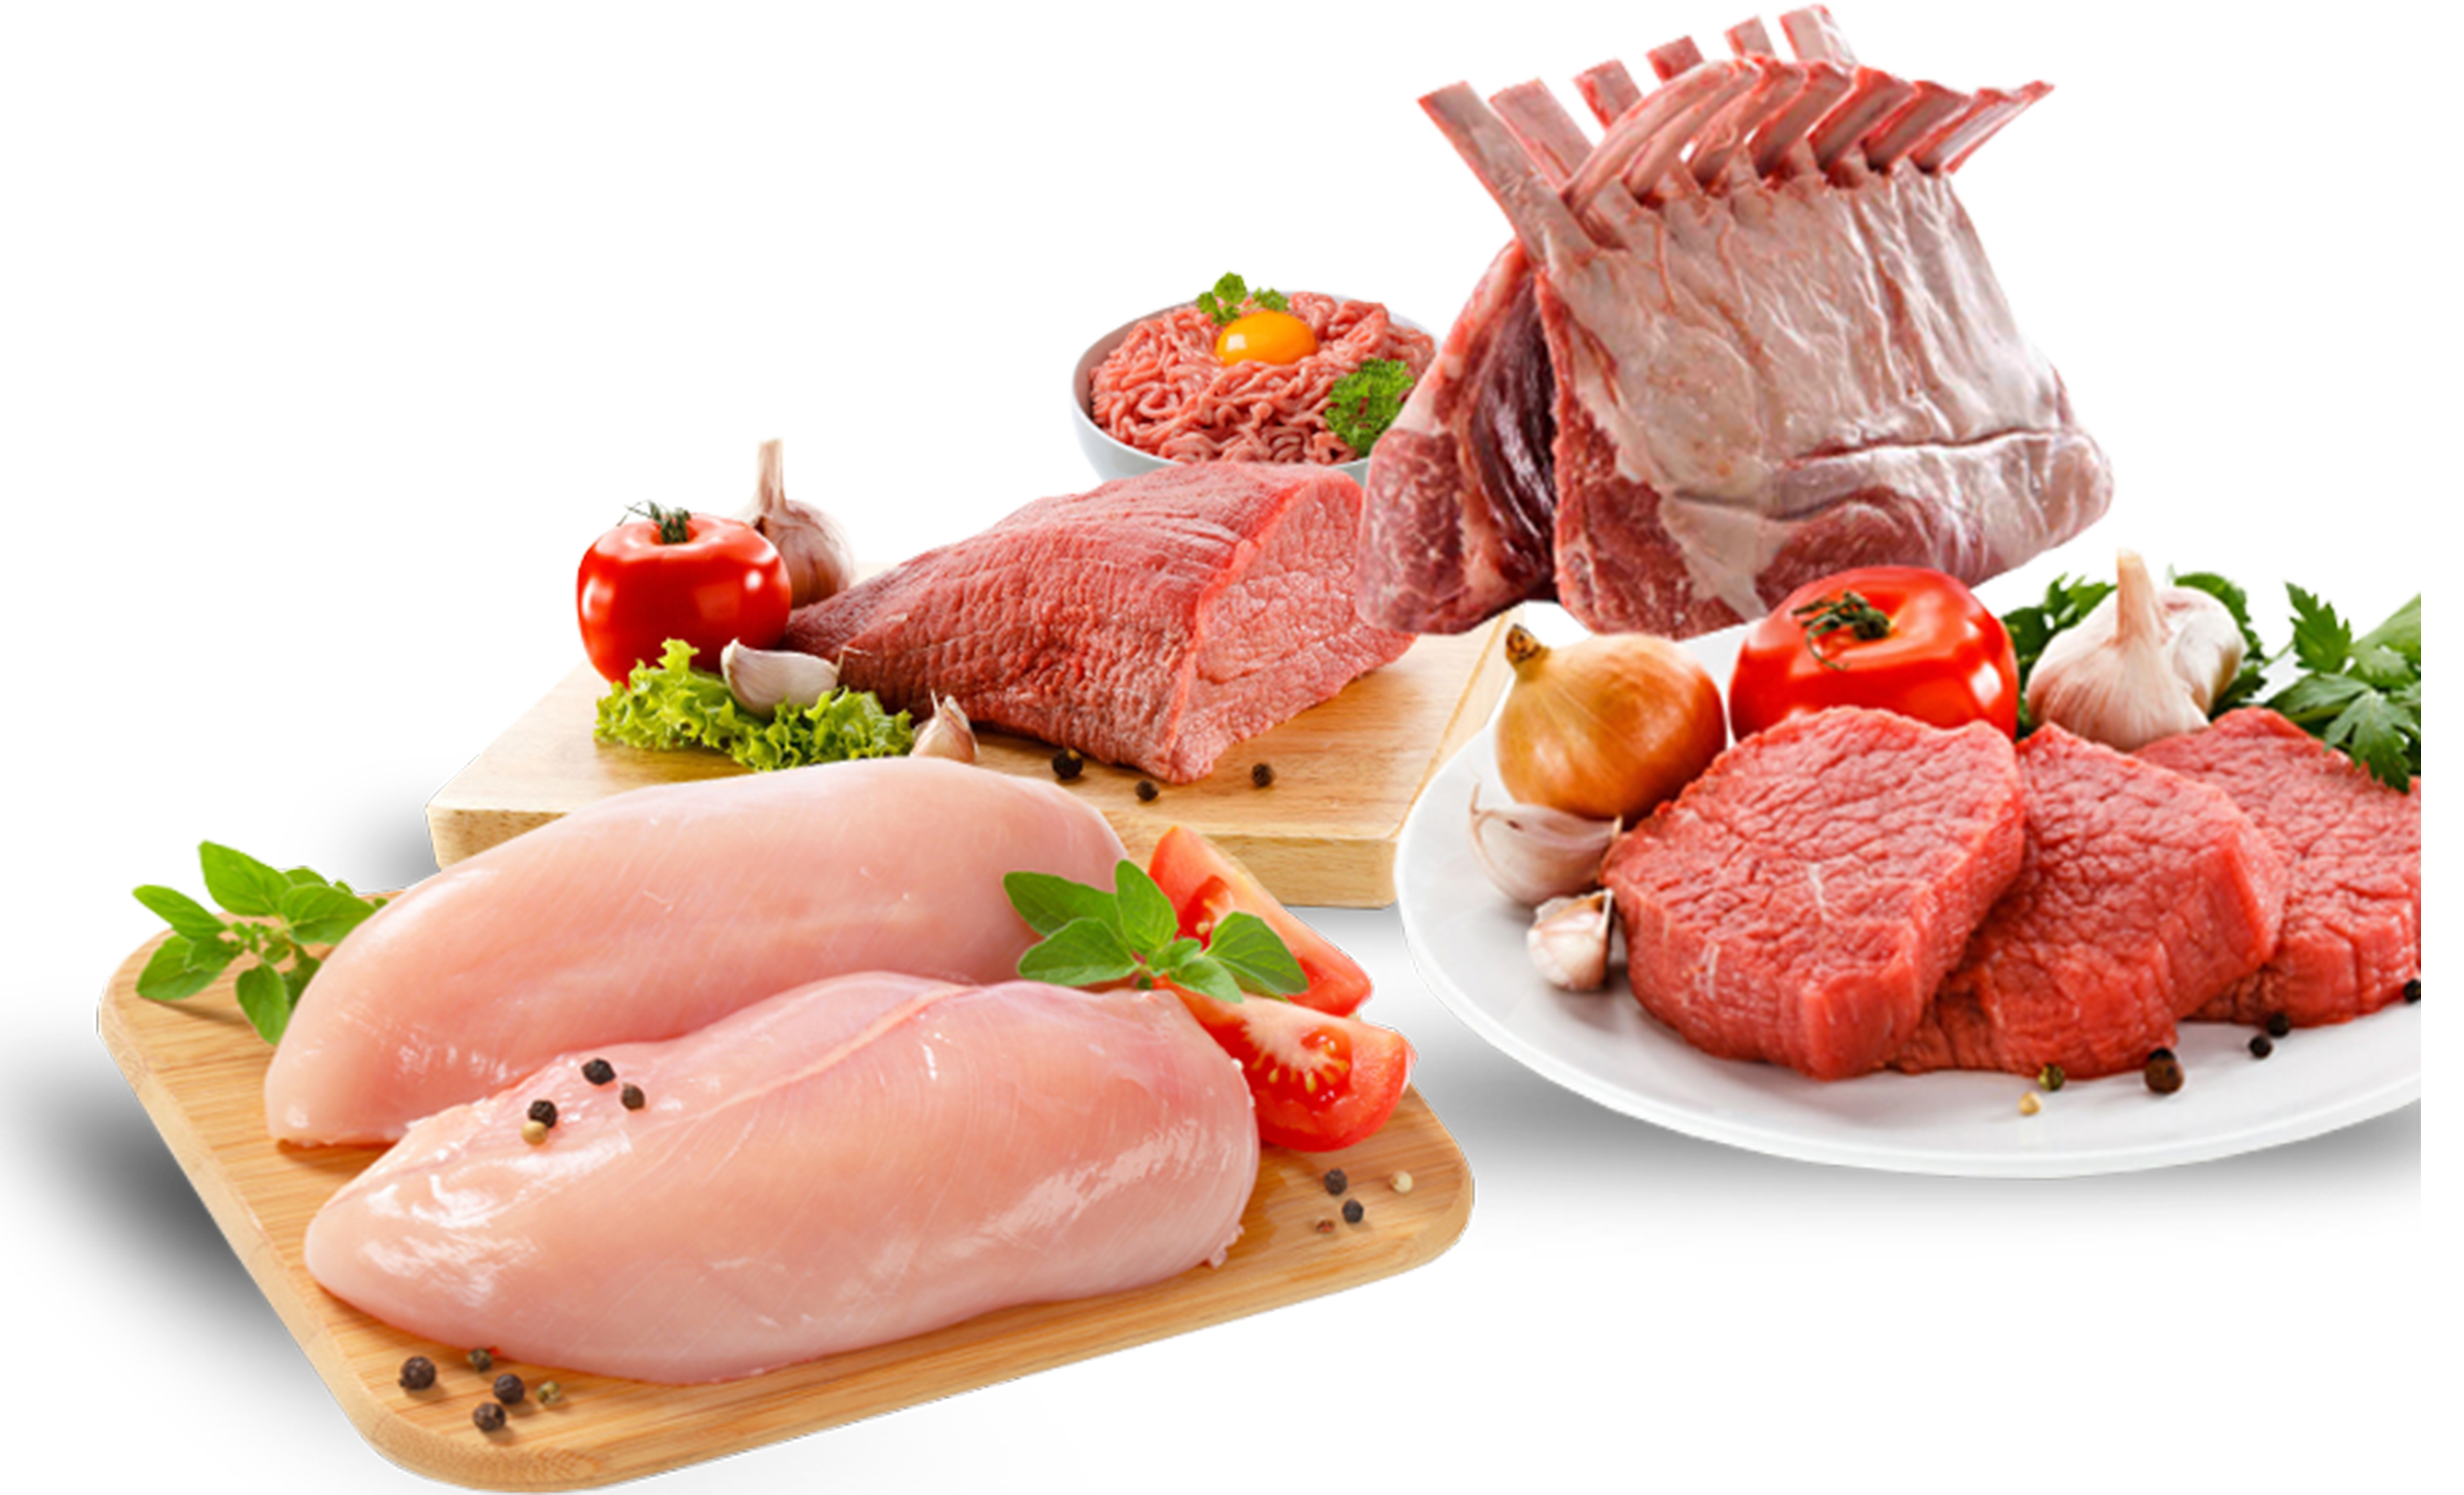 Meat & Poultry consultants